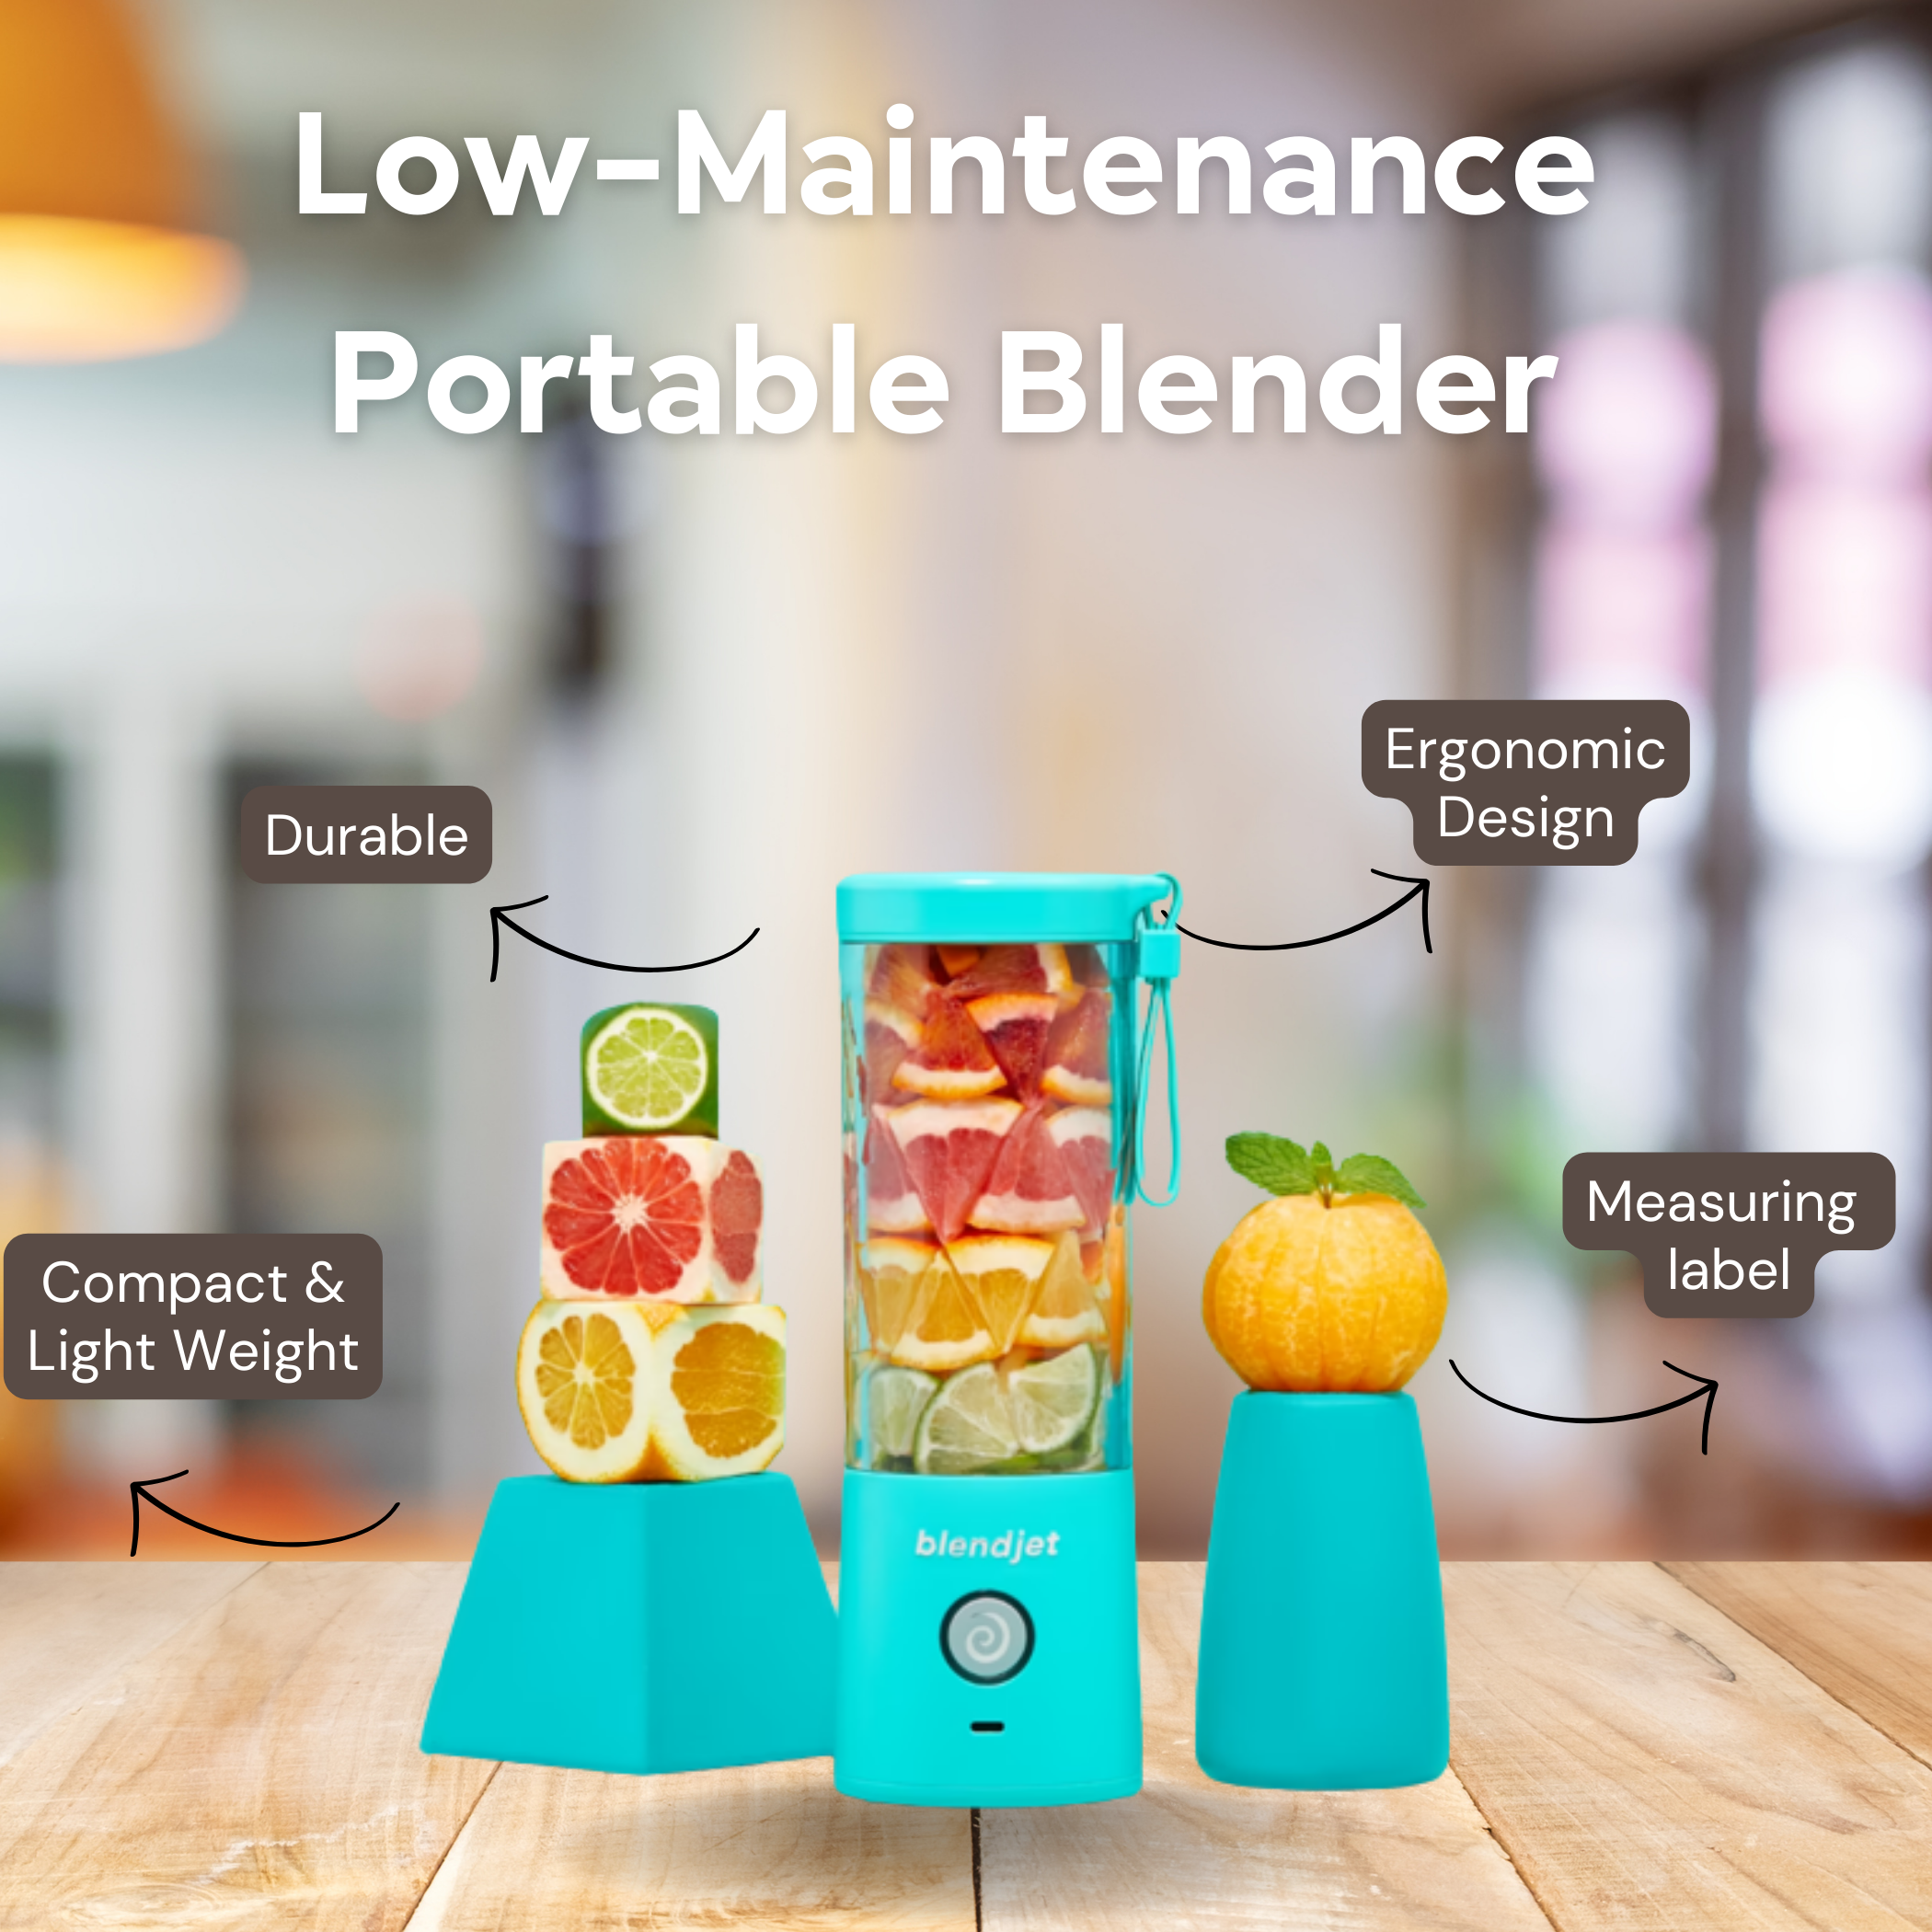 What is a low-maintenance portable blender?